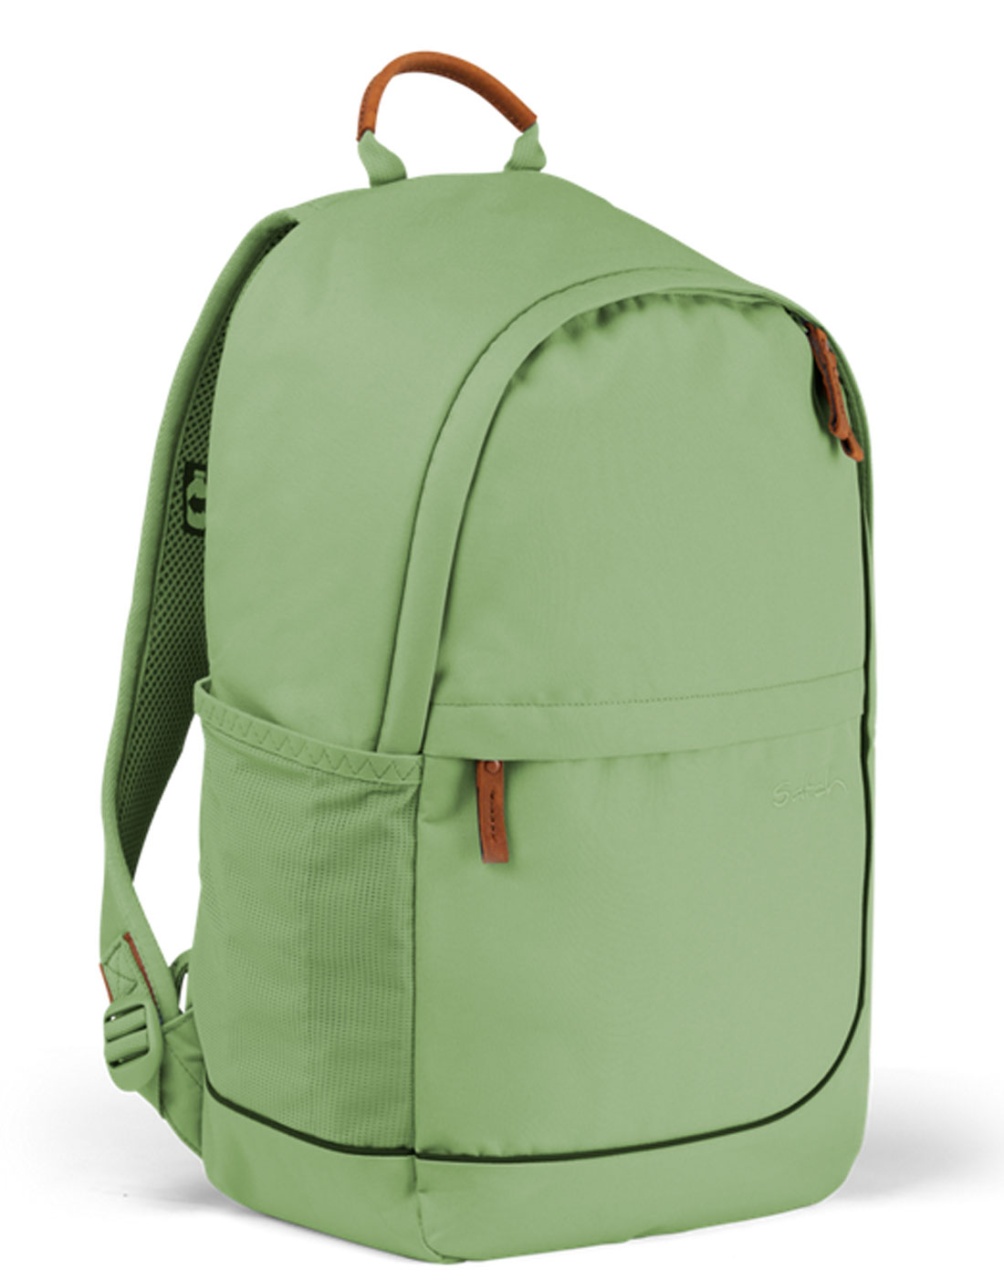 Ergobag Satch Daypack Fly Pure Jade Green